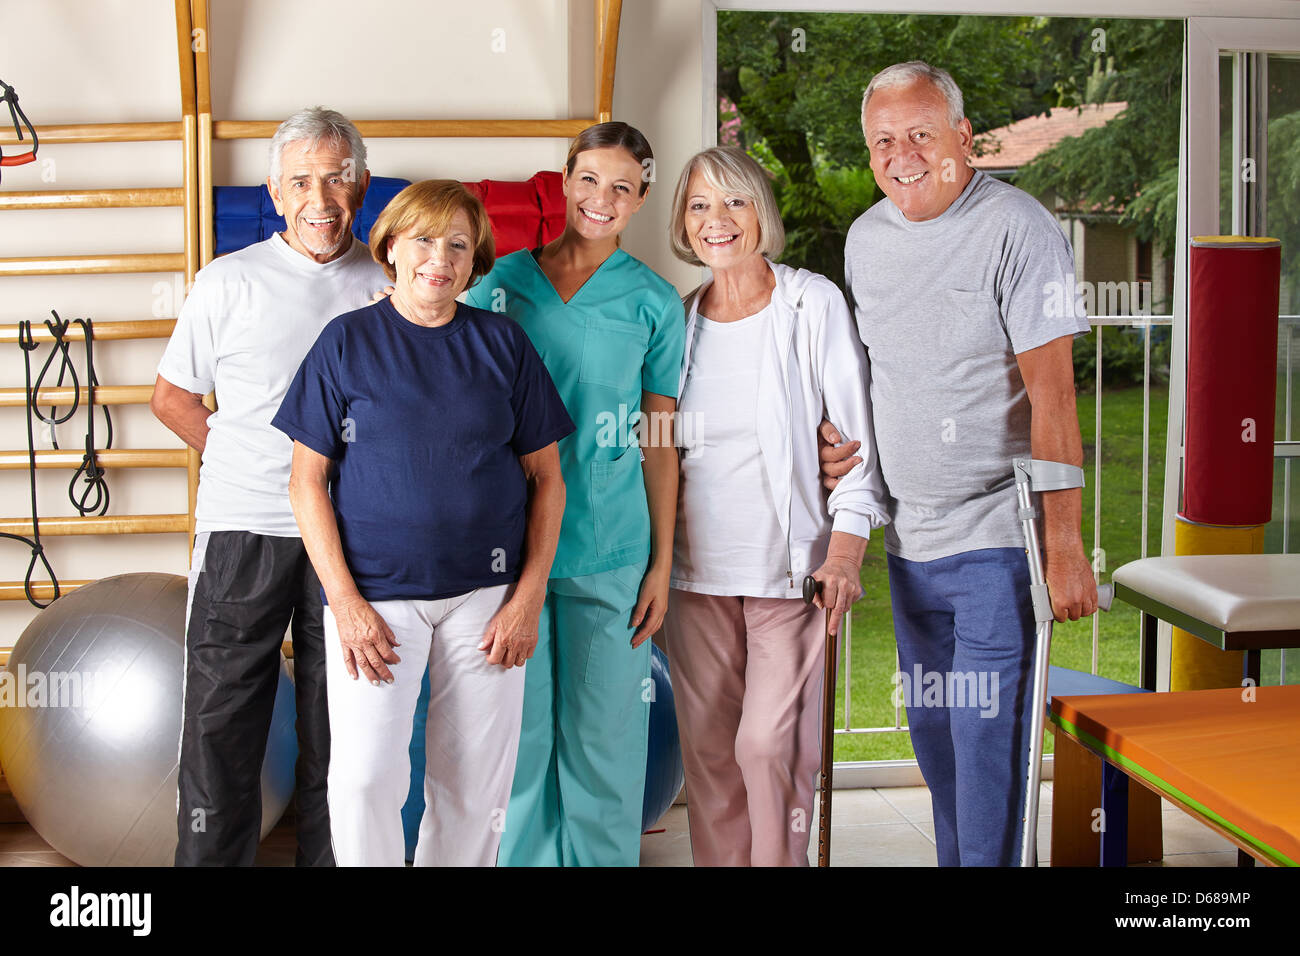 Group of senior people in physiotherapy with physiotherapist Stock Photo